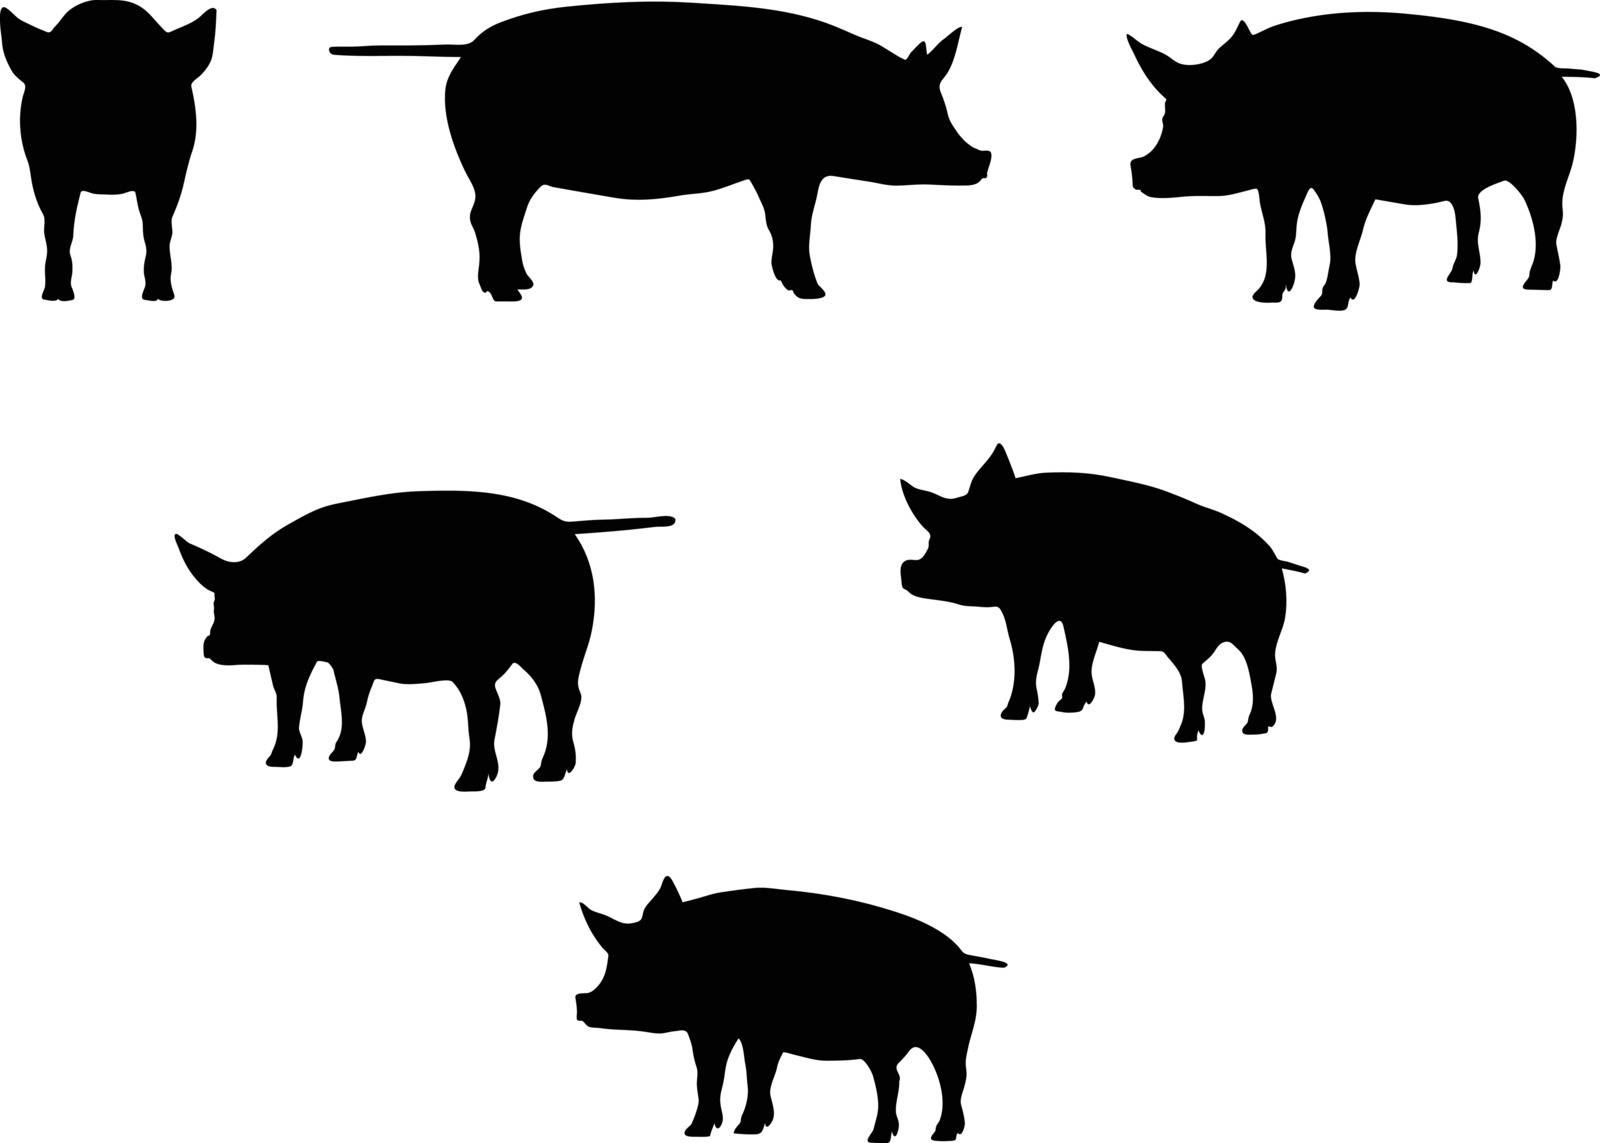 pig silhouette by Istanbul2009